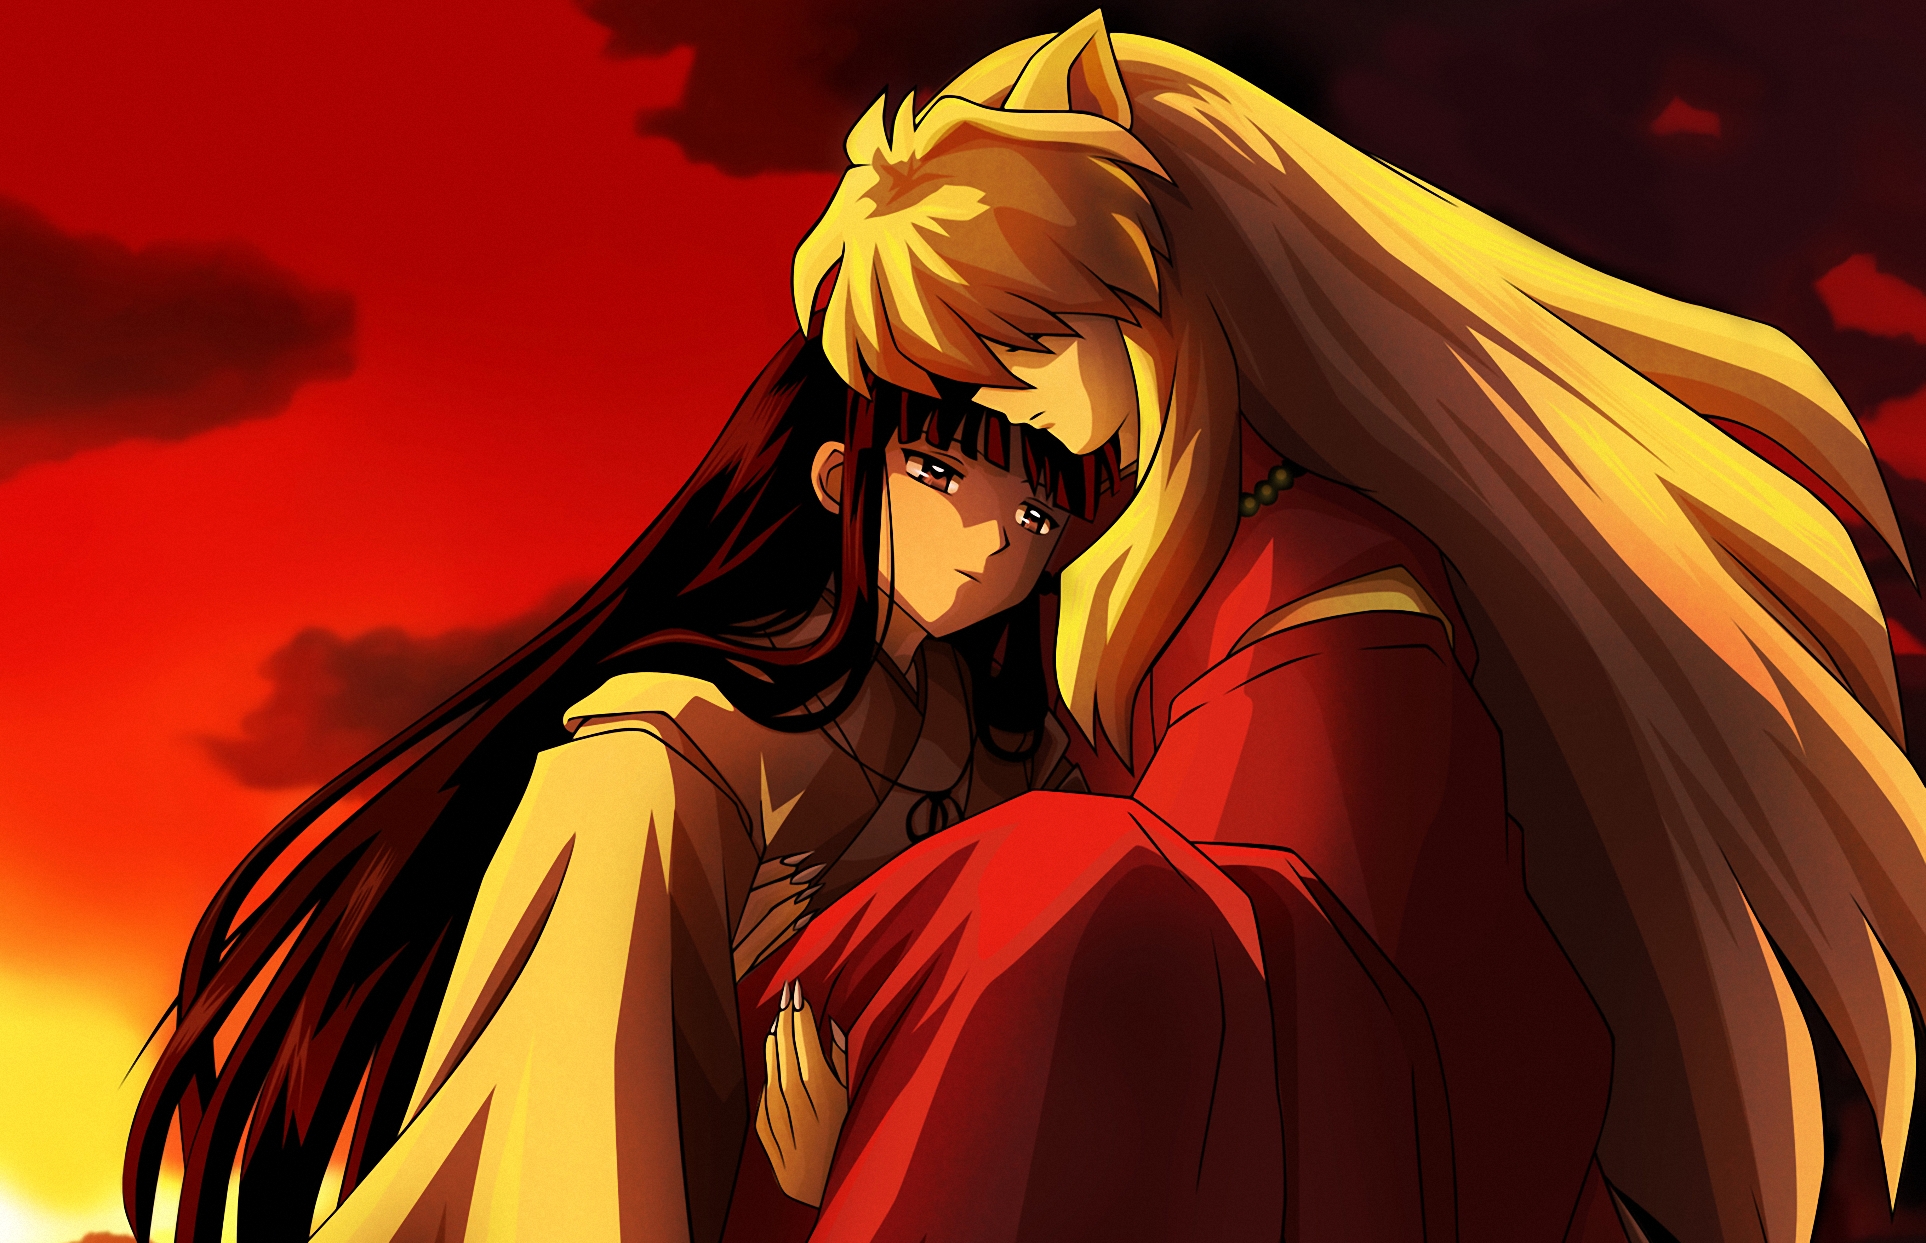 InuYasha and Kikyô standing together, ready for battle.